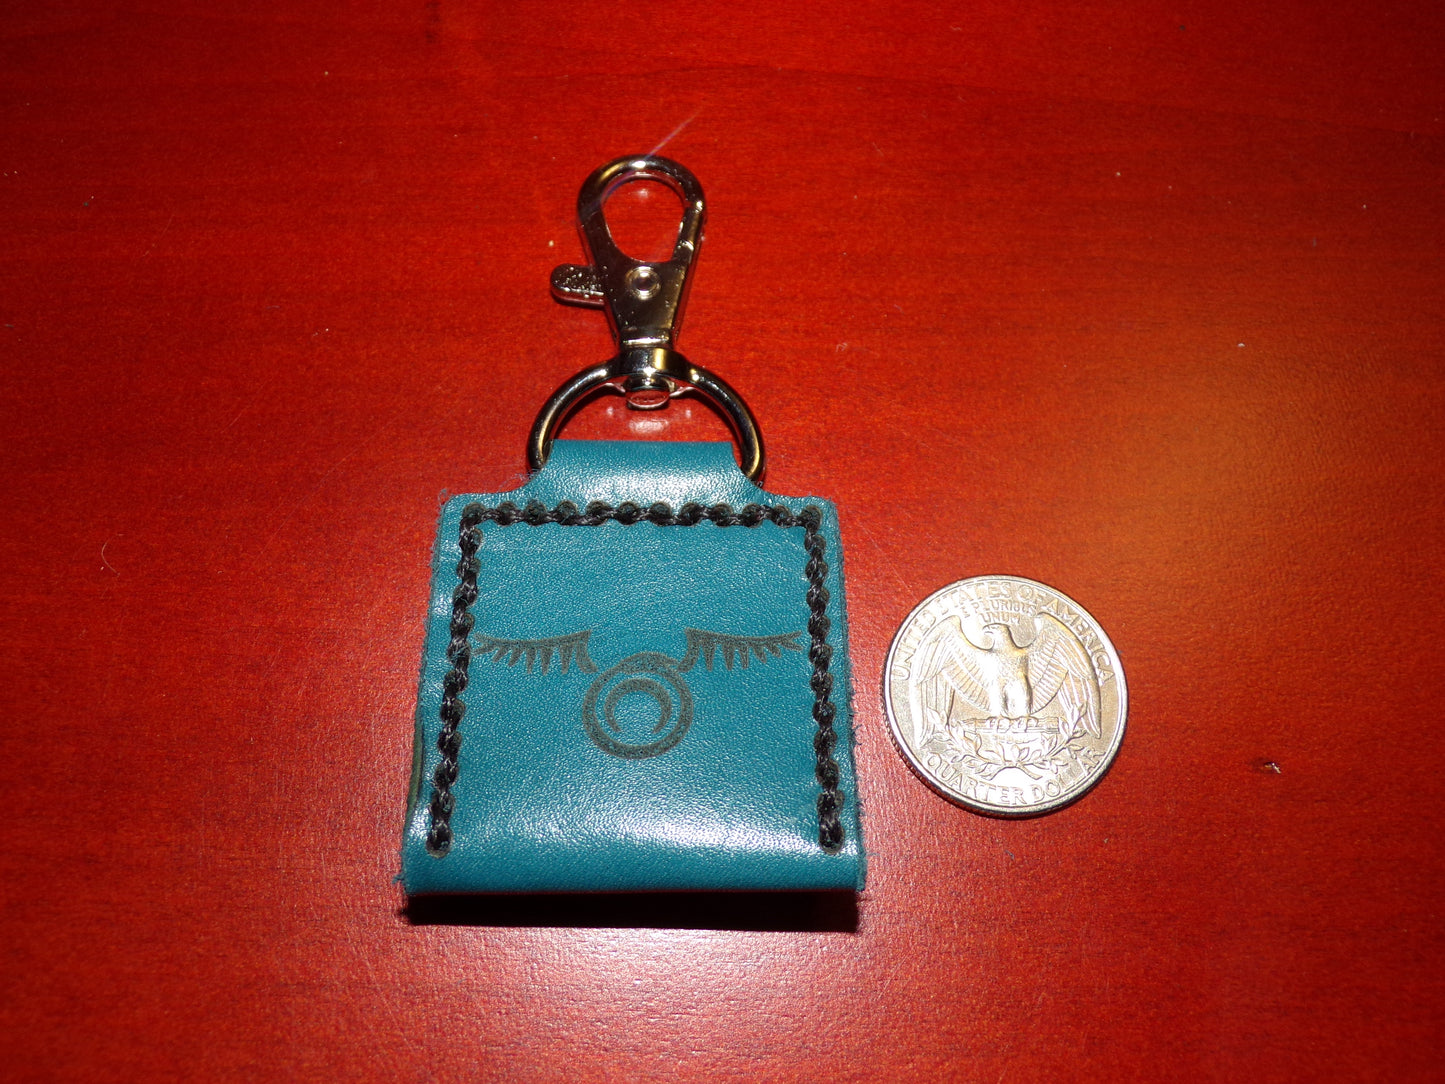 Styx Leather Guitar Pic/SD Card holder Keychain